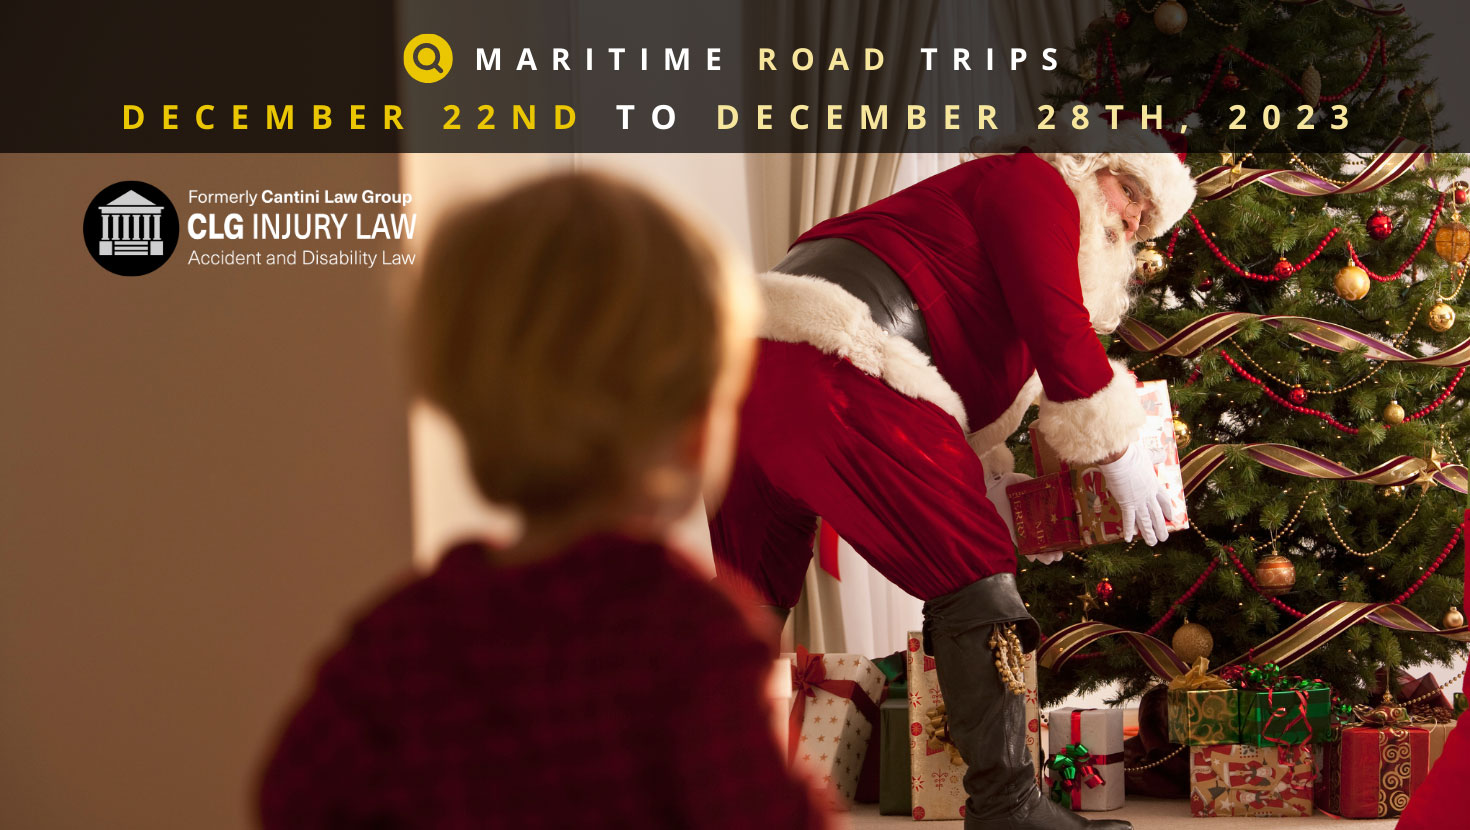 Little boy catches Santa Clause placing a gift under the christmas tree with the text Maritime Road Trips: Destination Drives for the Week of December 22nd to December 28th, 2023